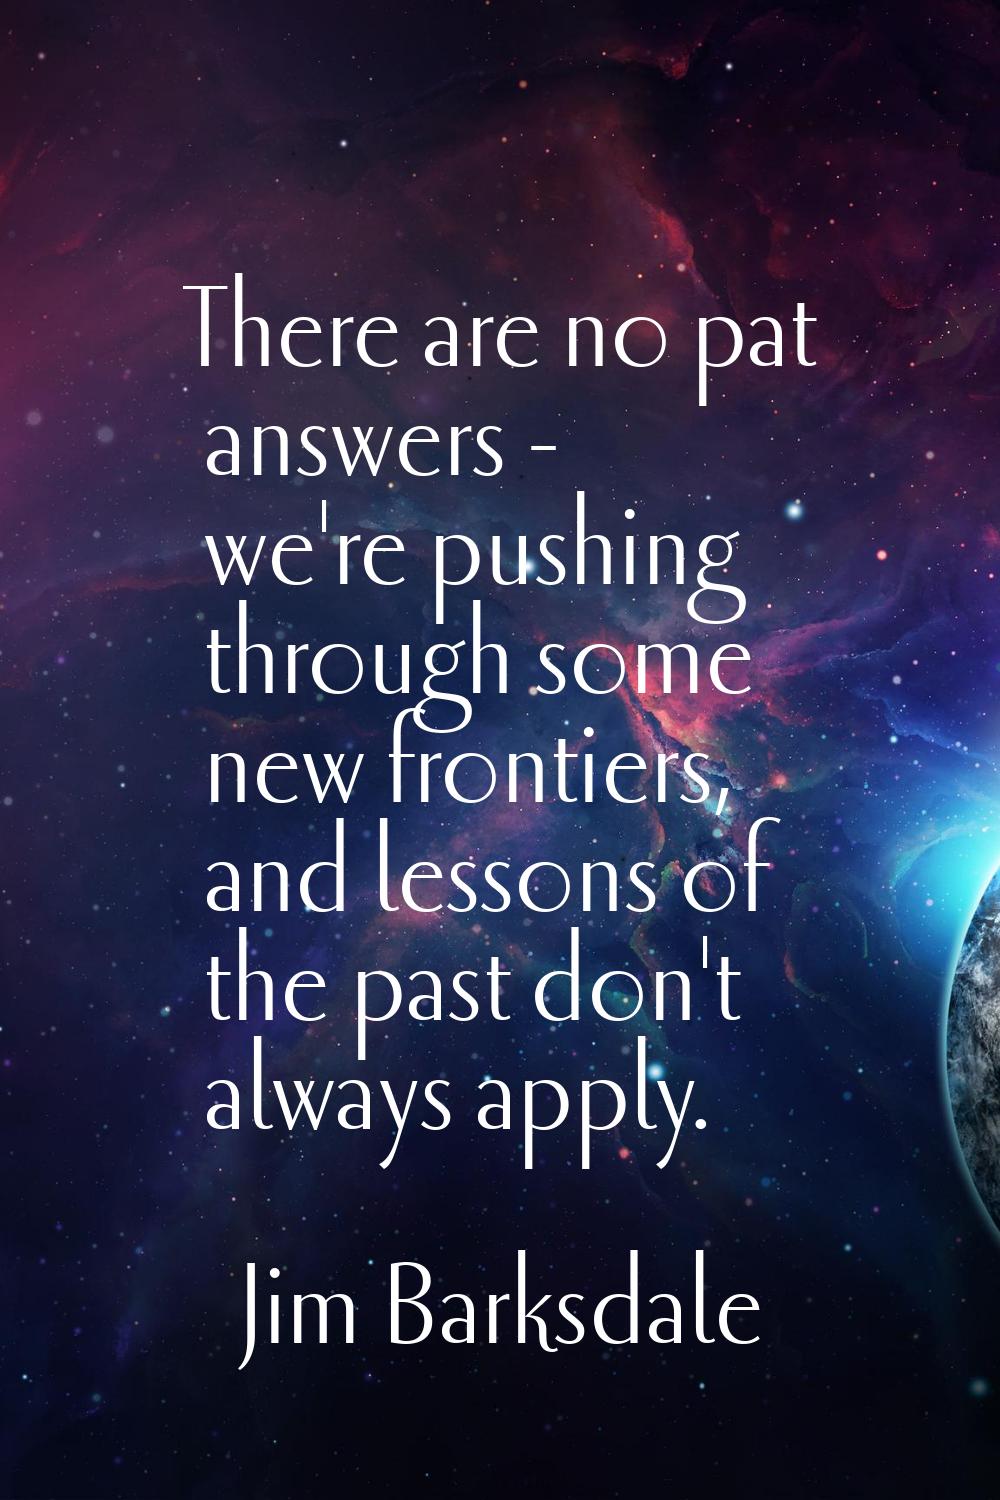 There are no pat answers - we're pushing through some new frontiers, and lessons of the past don't 